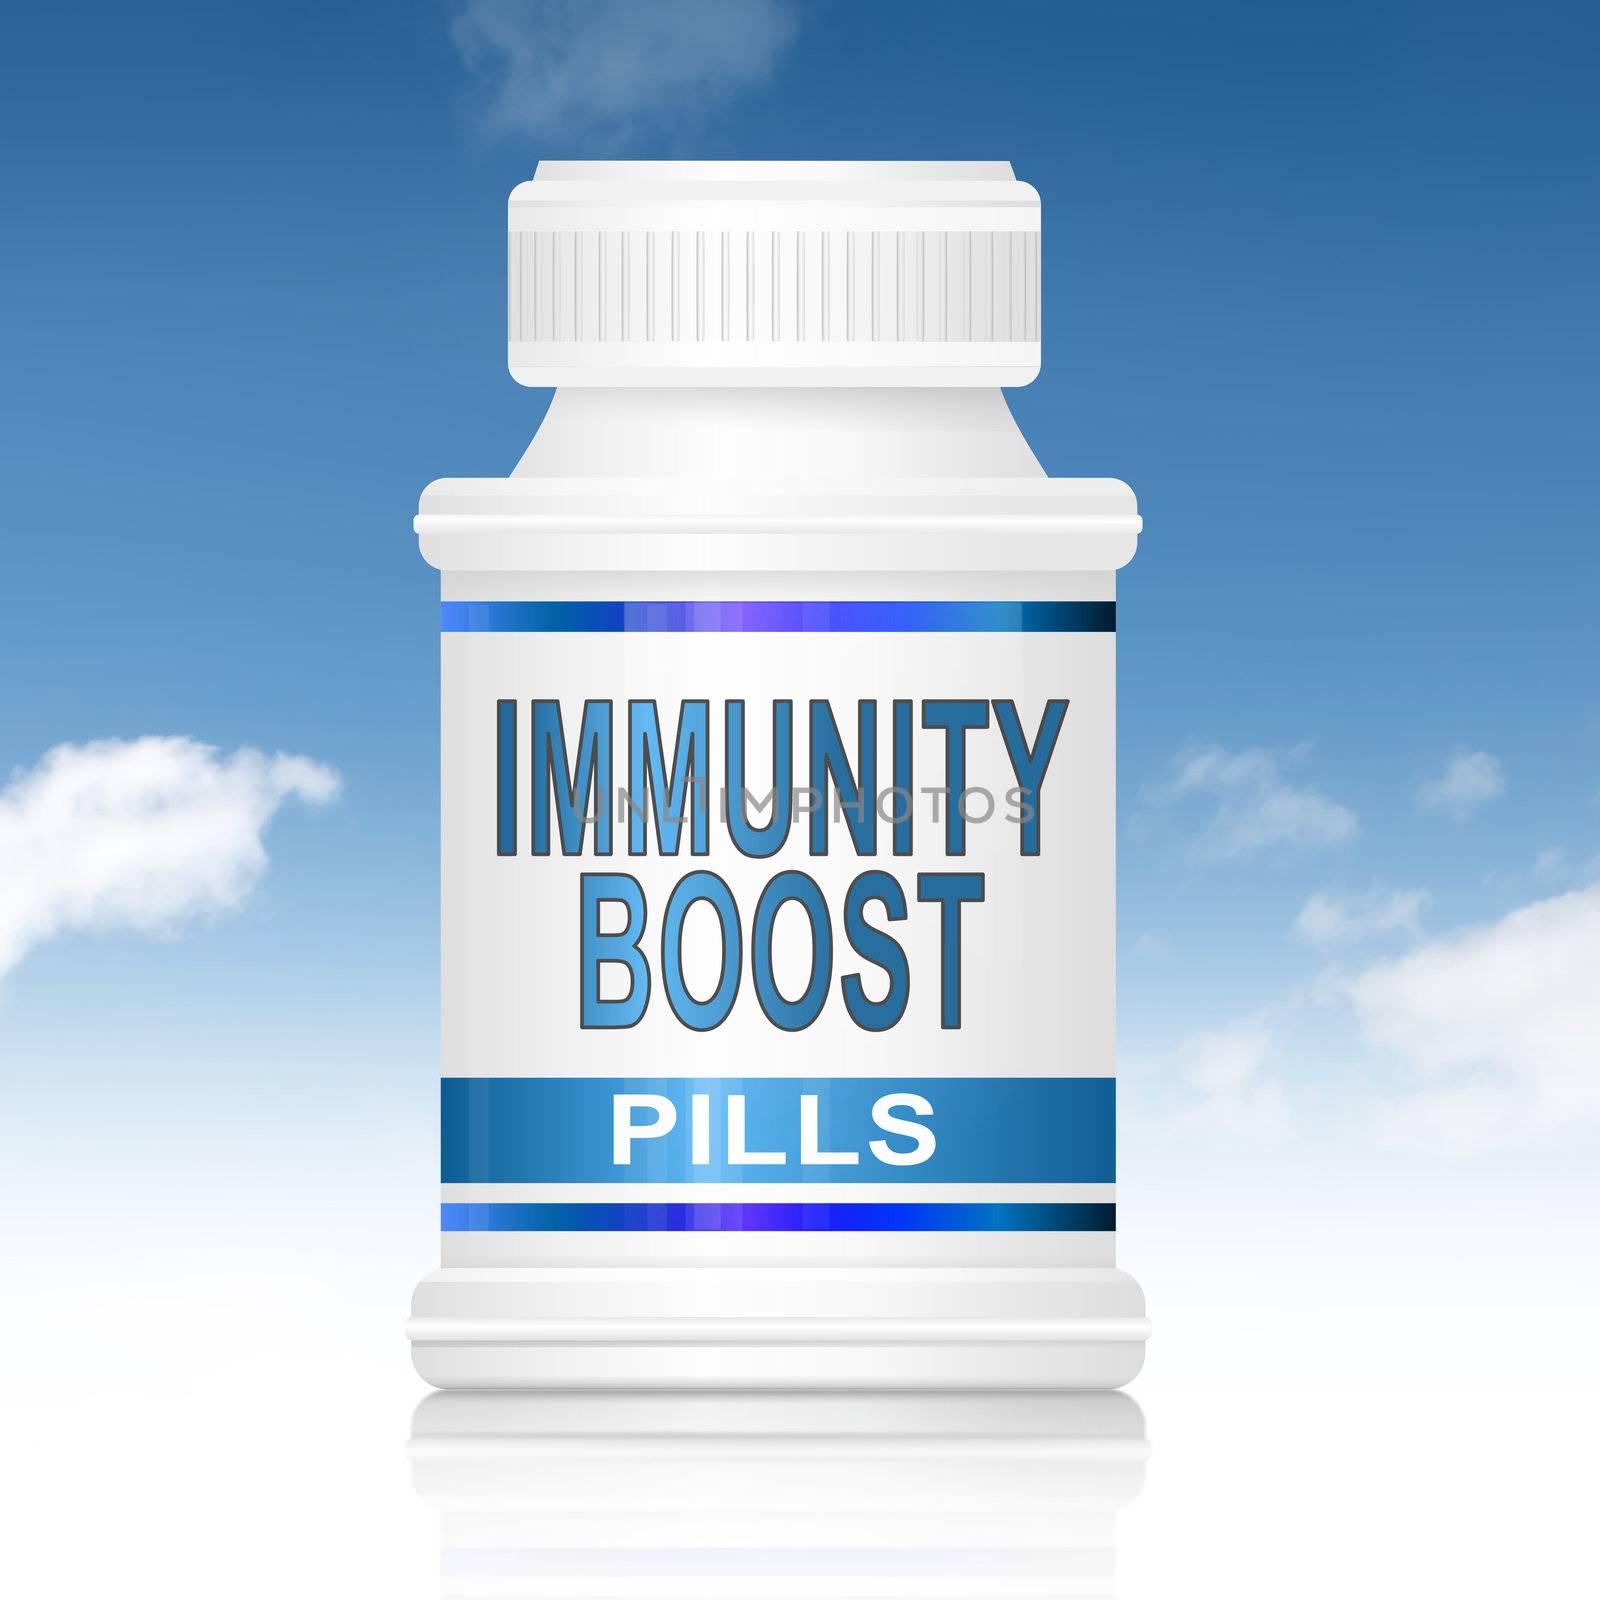 Immunity boost concept. by 72soul